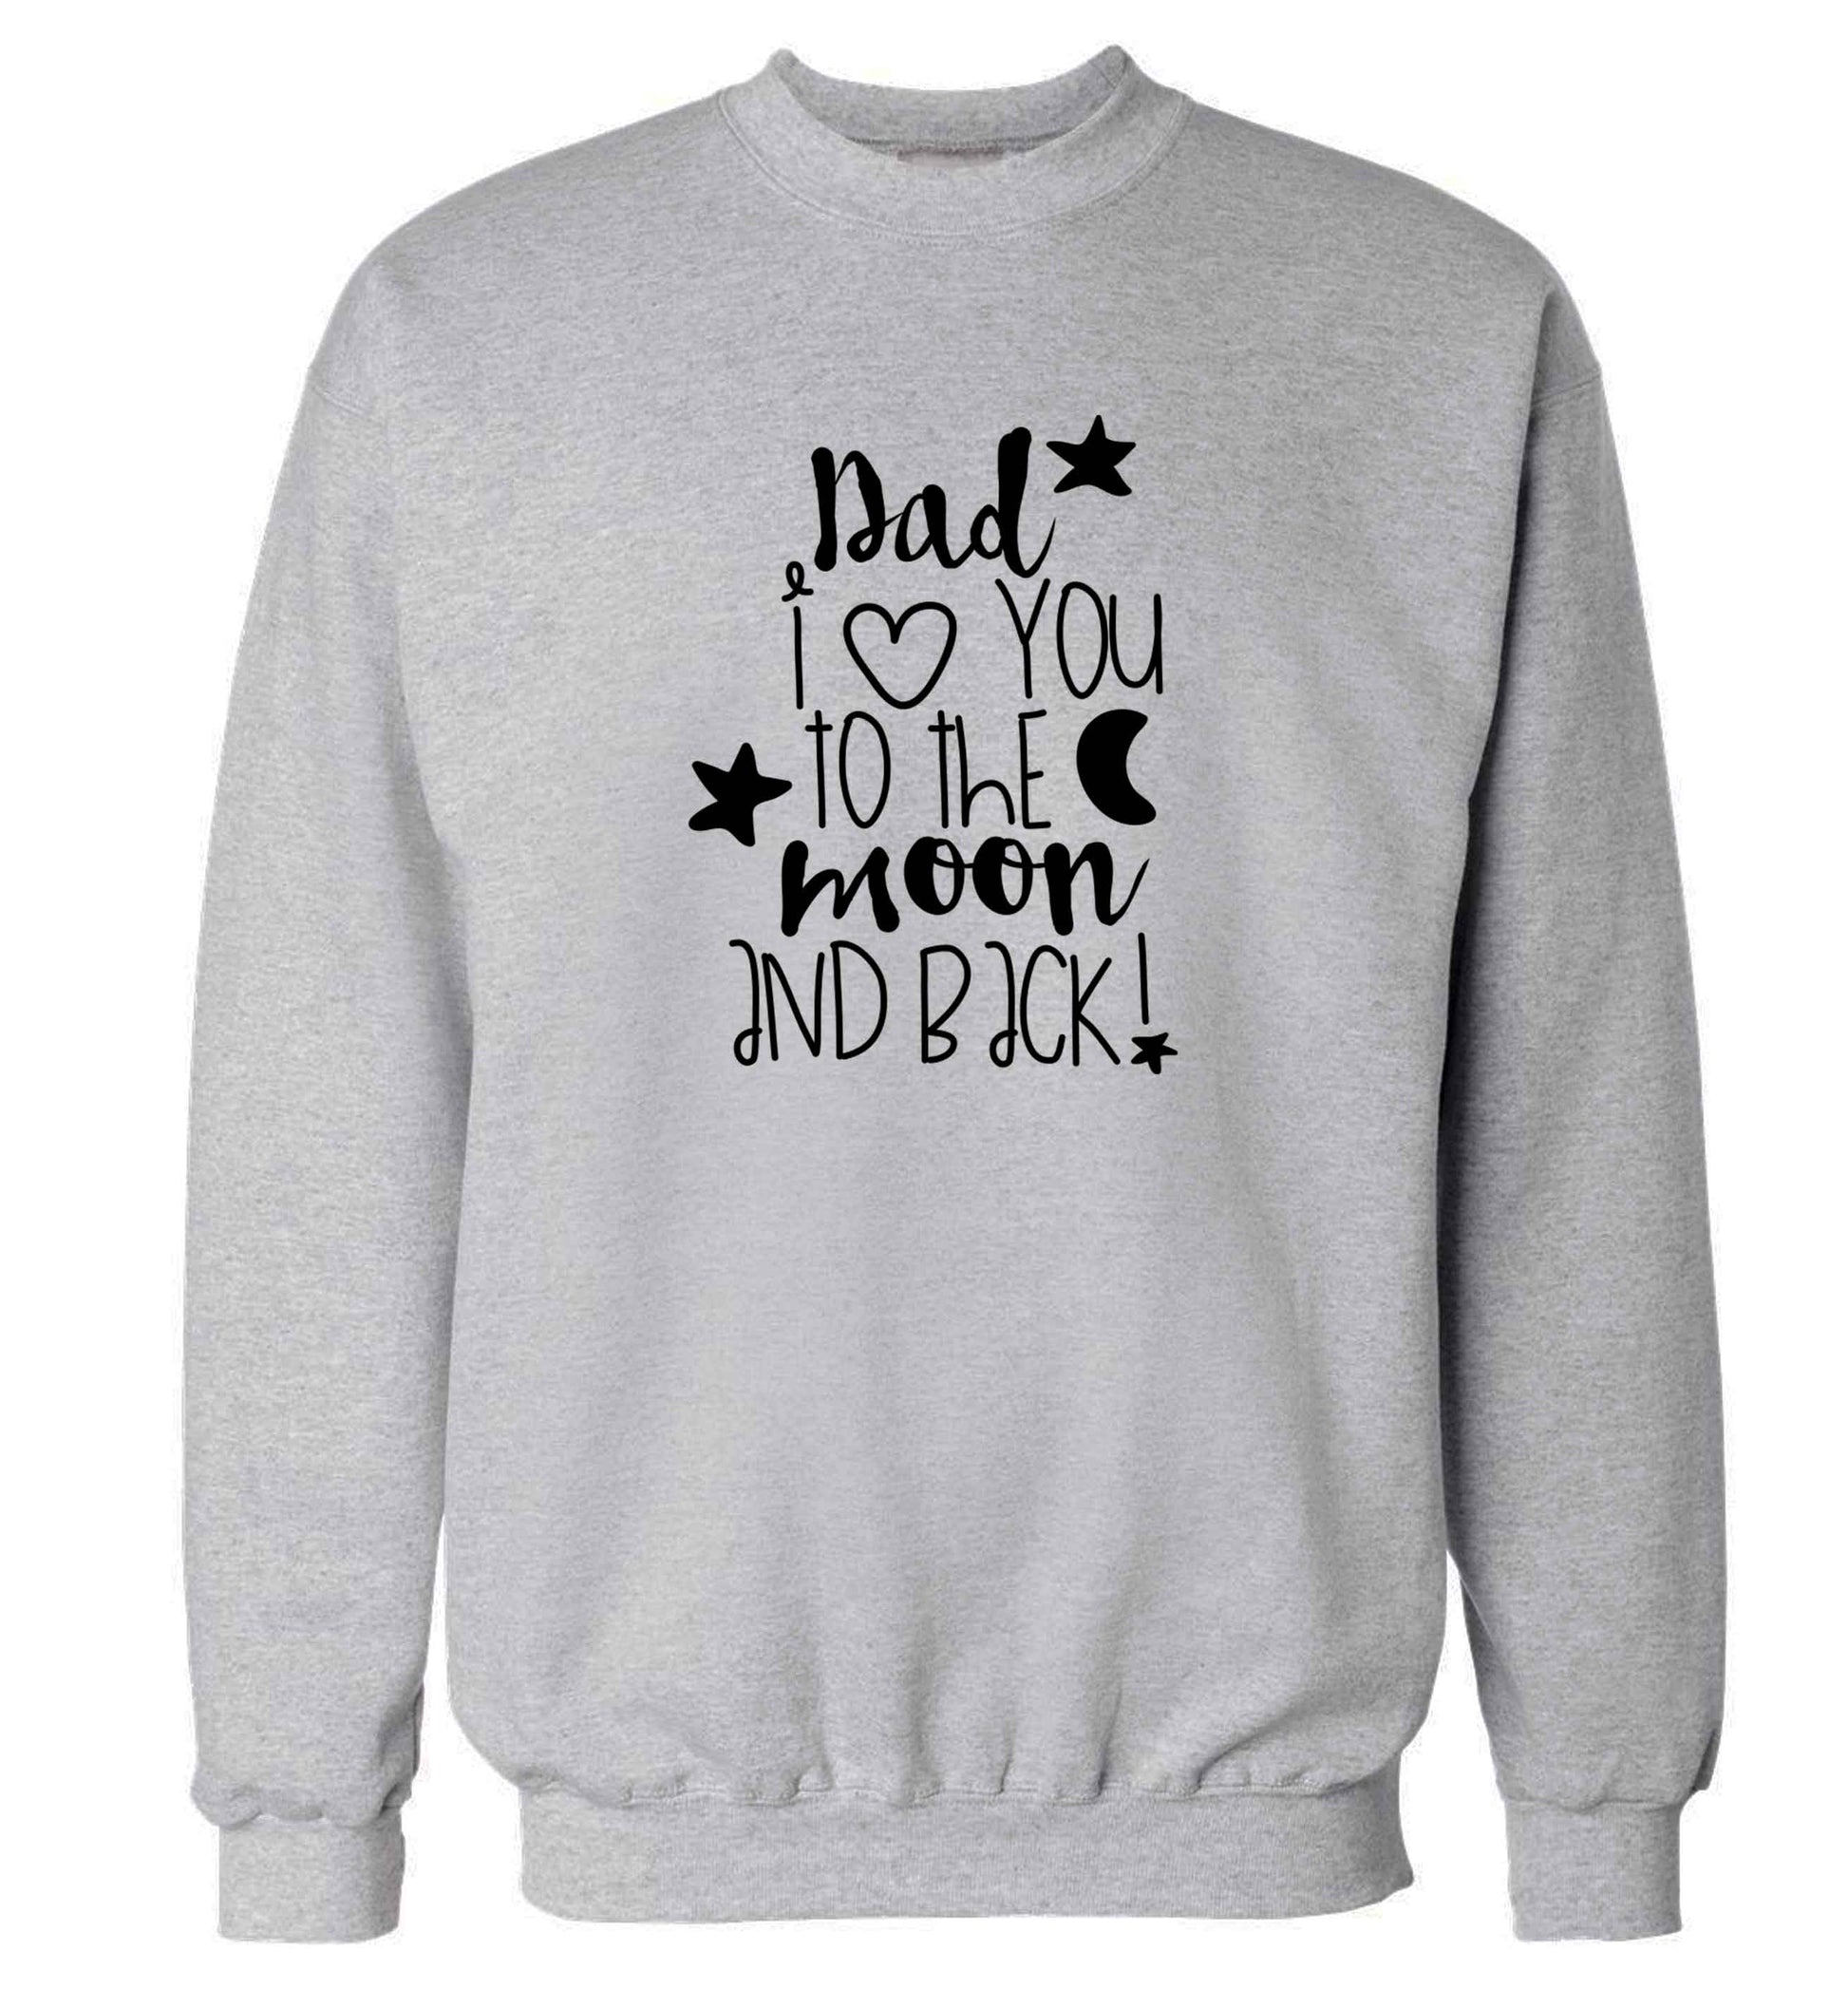 Dad I love you to the moon and back adult's unisex grey sweater 2XL